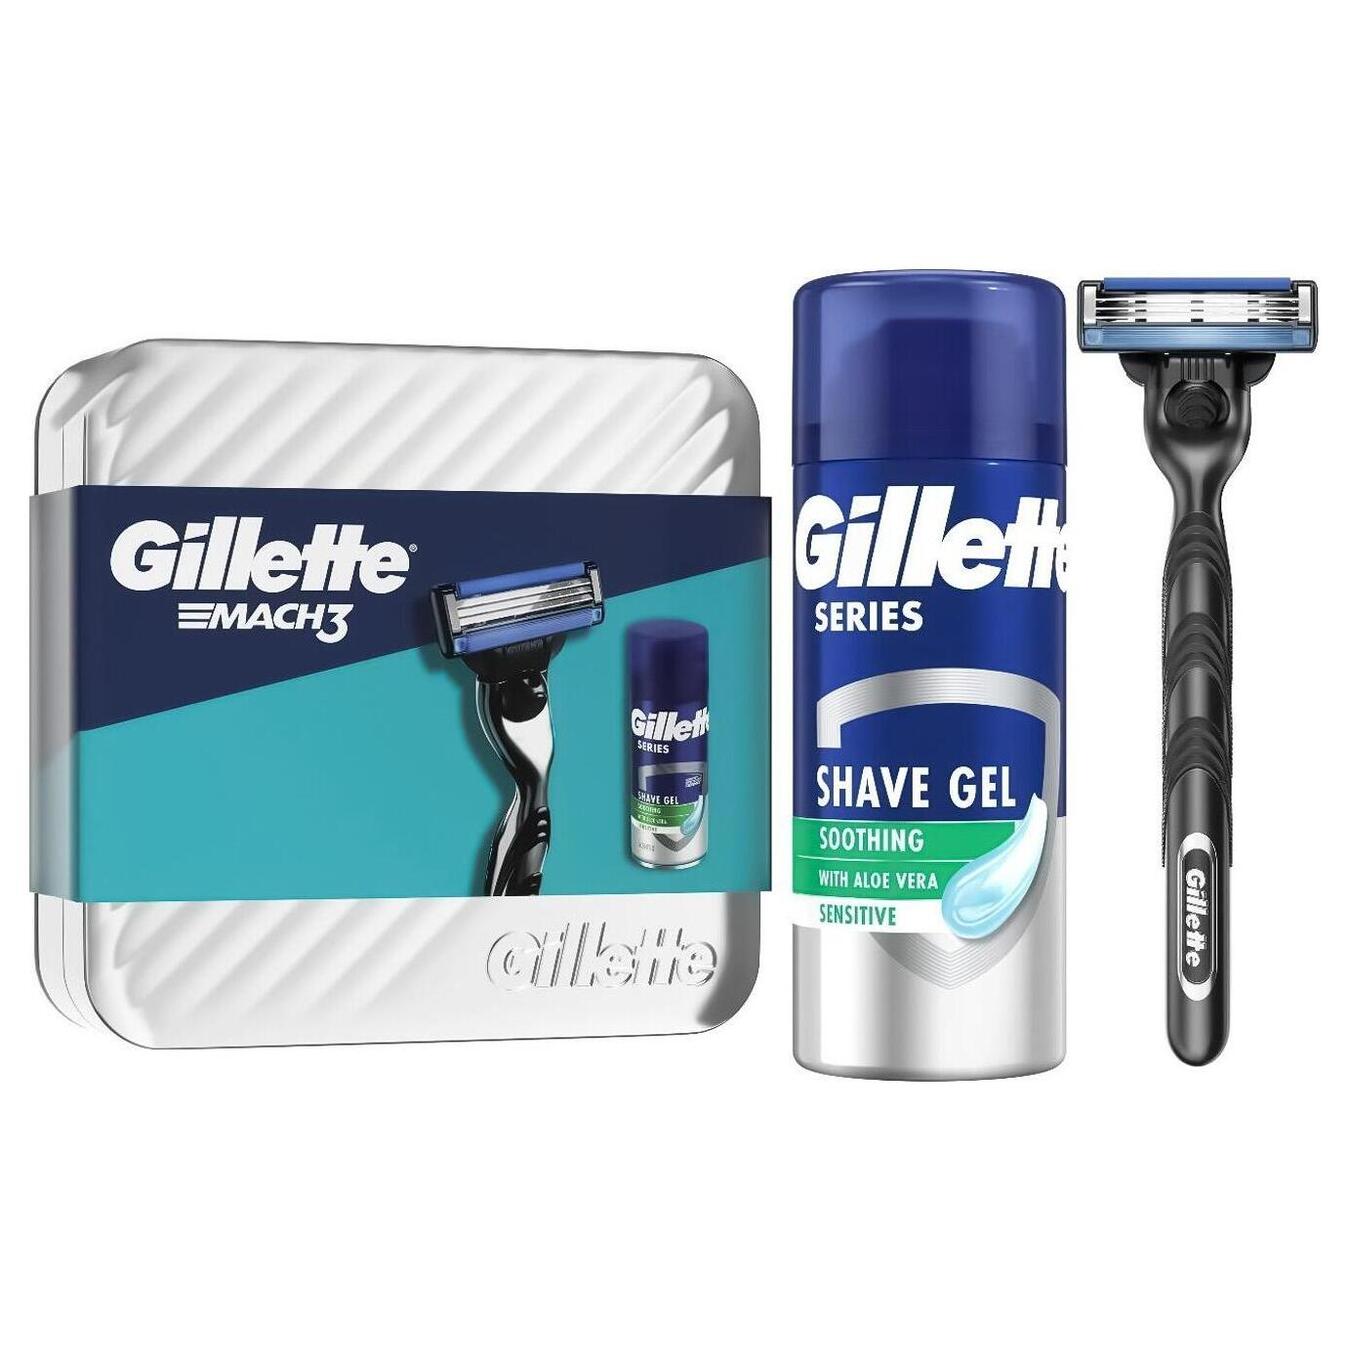 Razor set with 1 replaceable cartridge + shaving gel Series soothing Gillette Mach 375ml 2